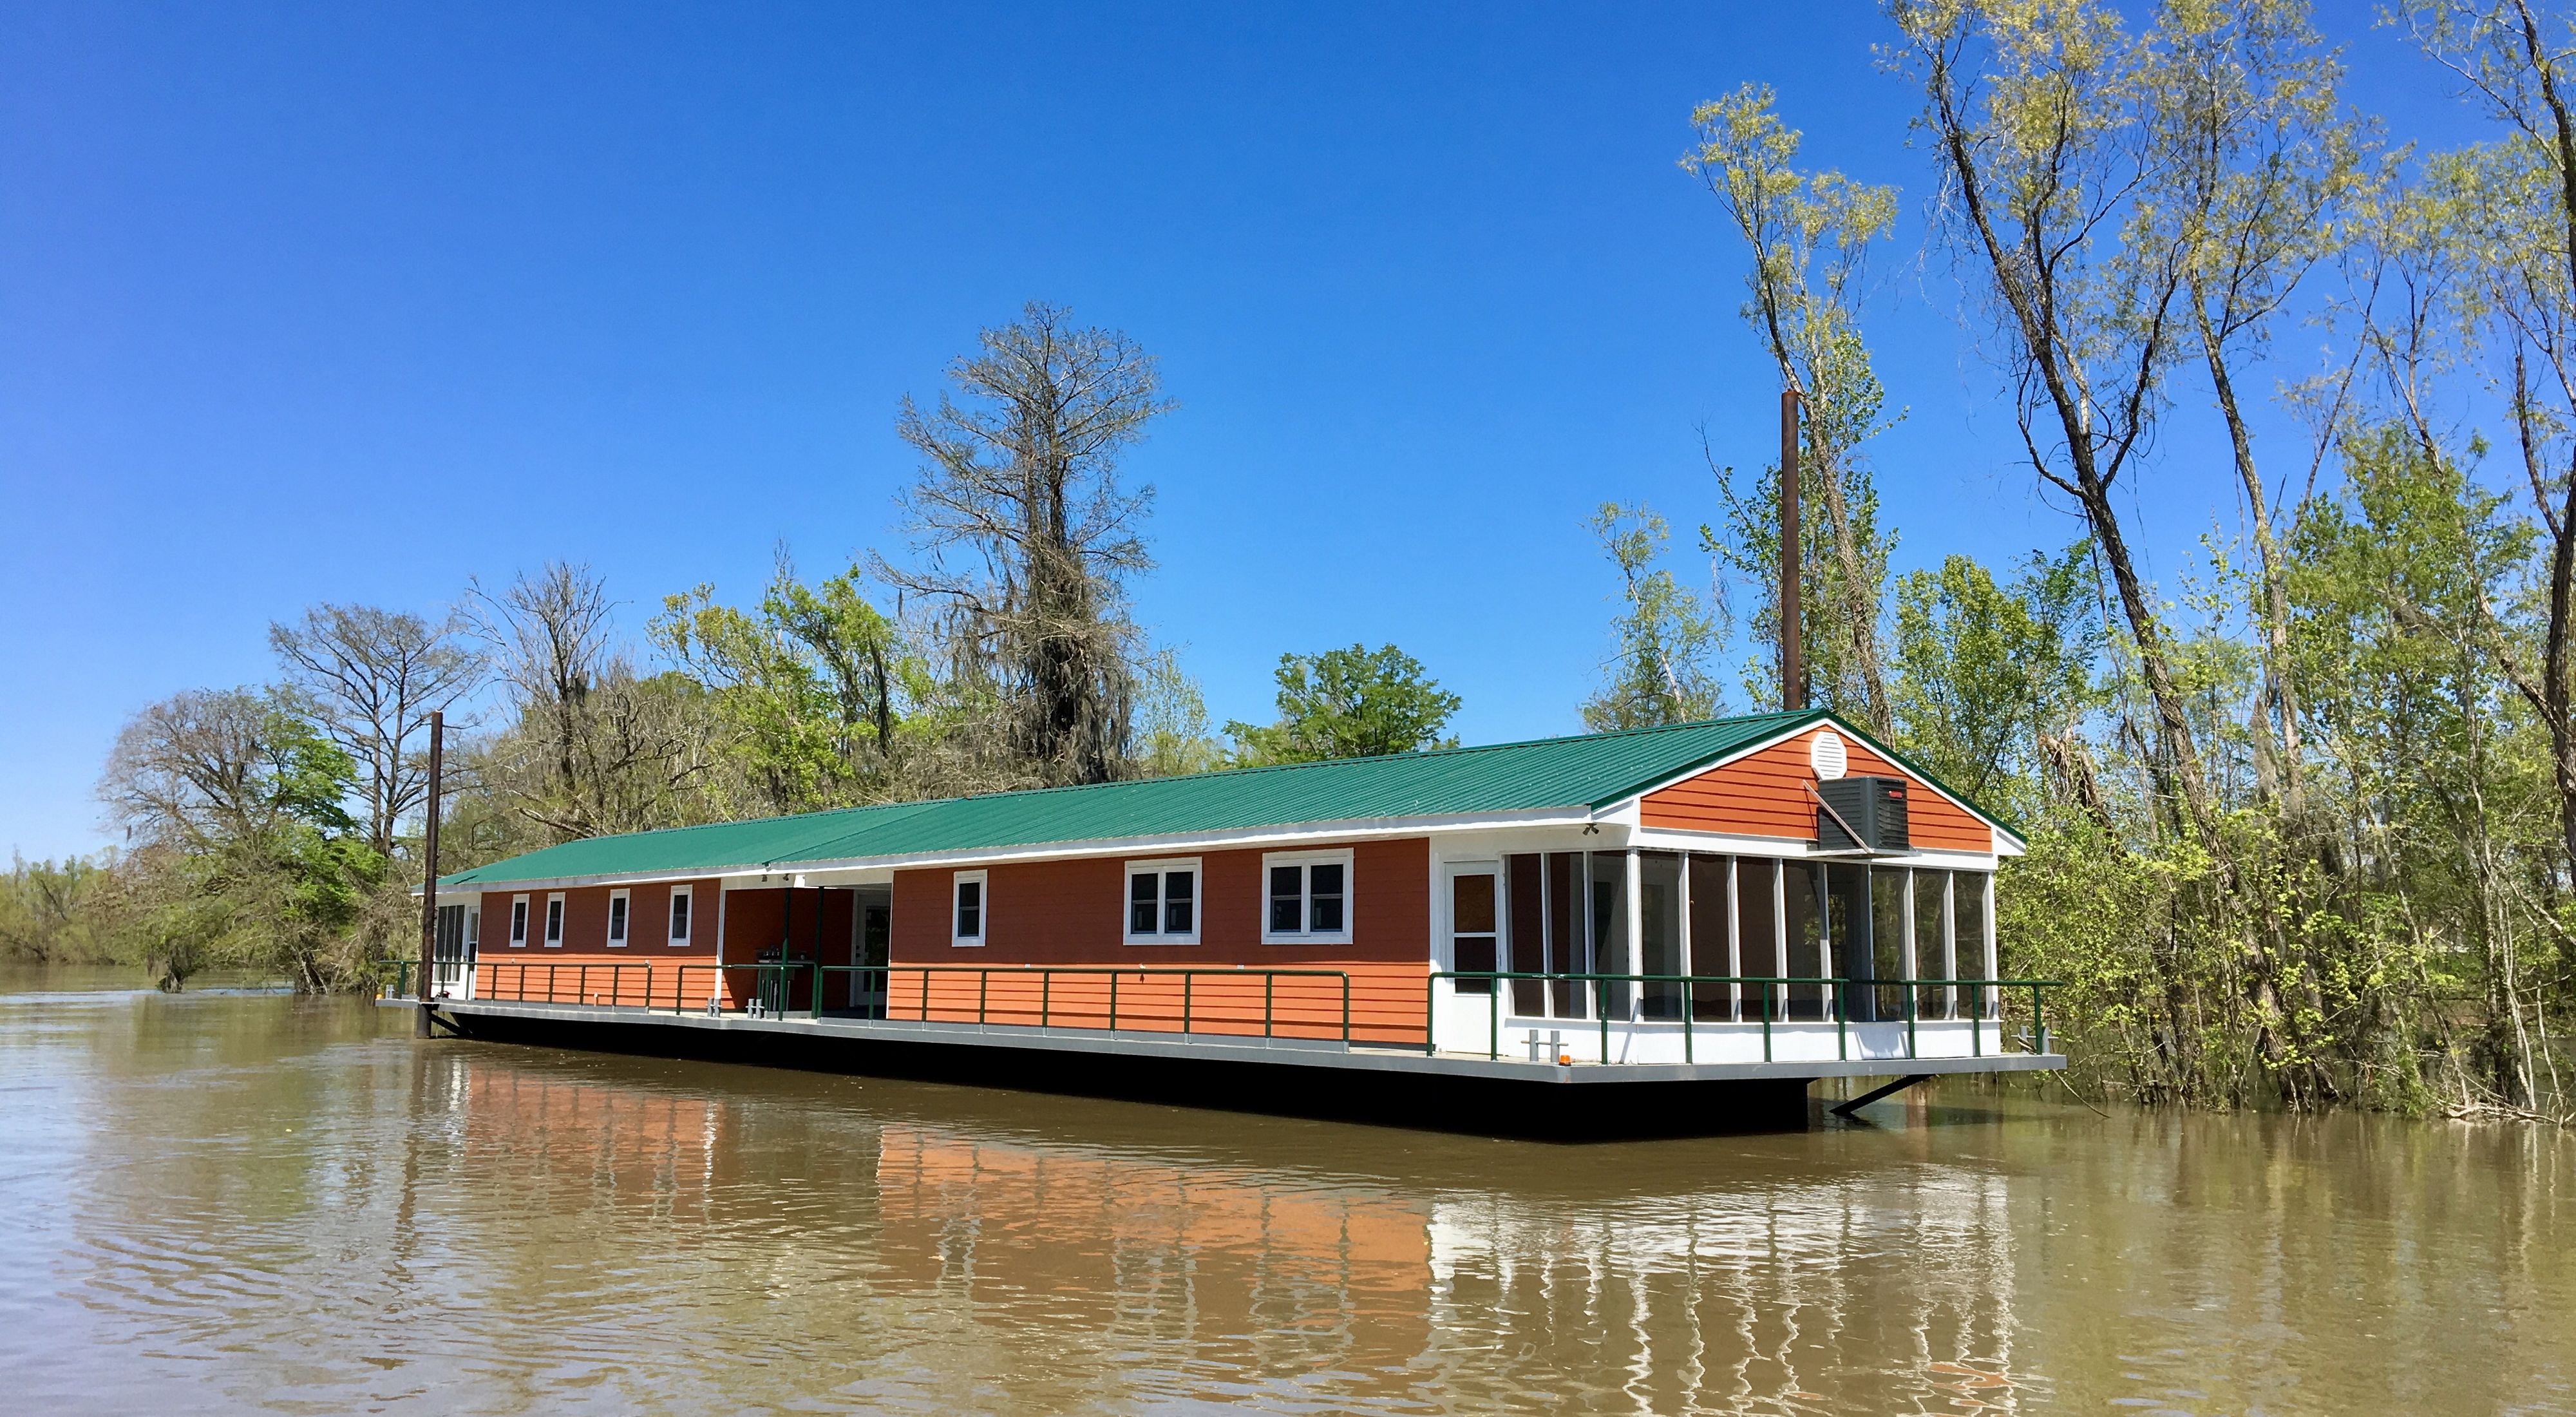 A large barge with a house-like structure on it floats on a flat, calm body of water with trees lining its banks.